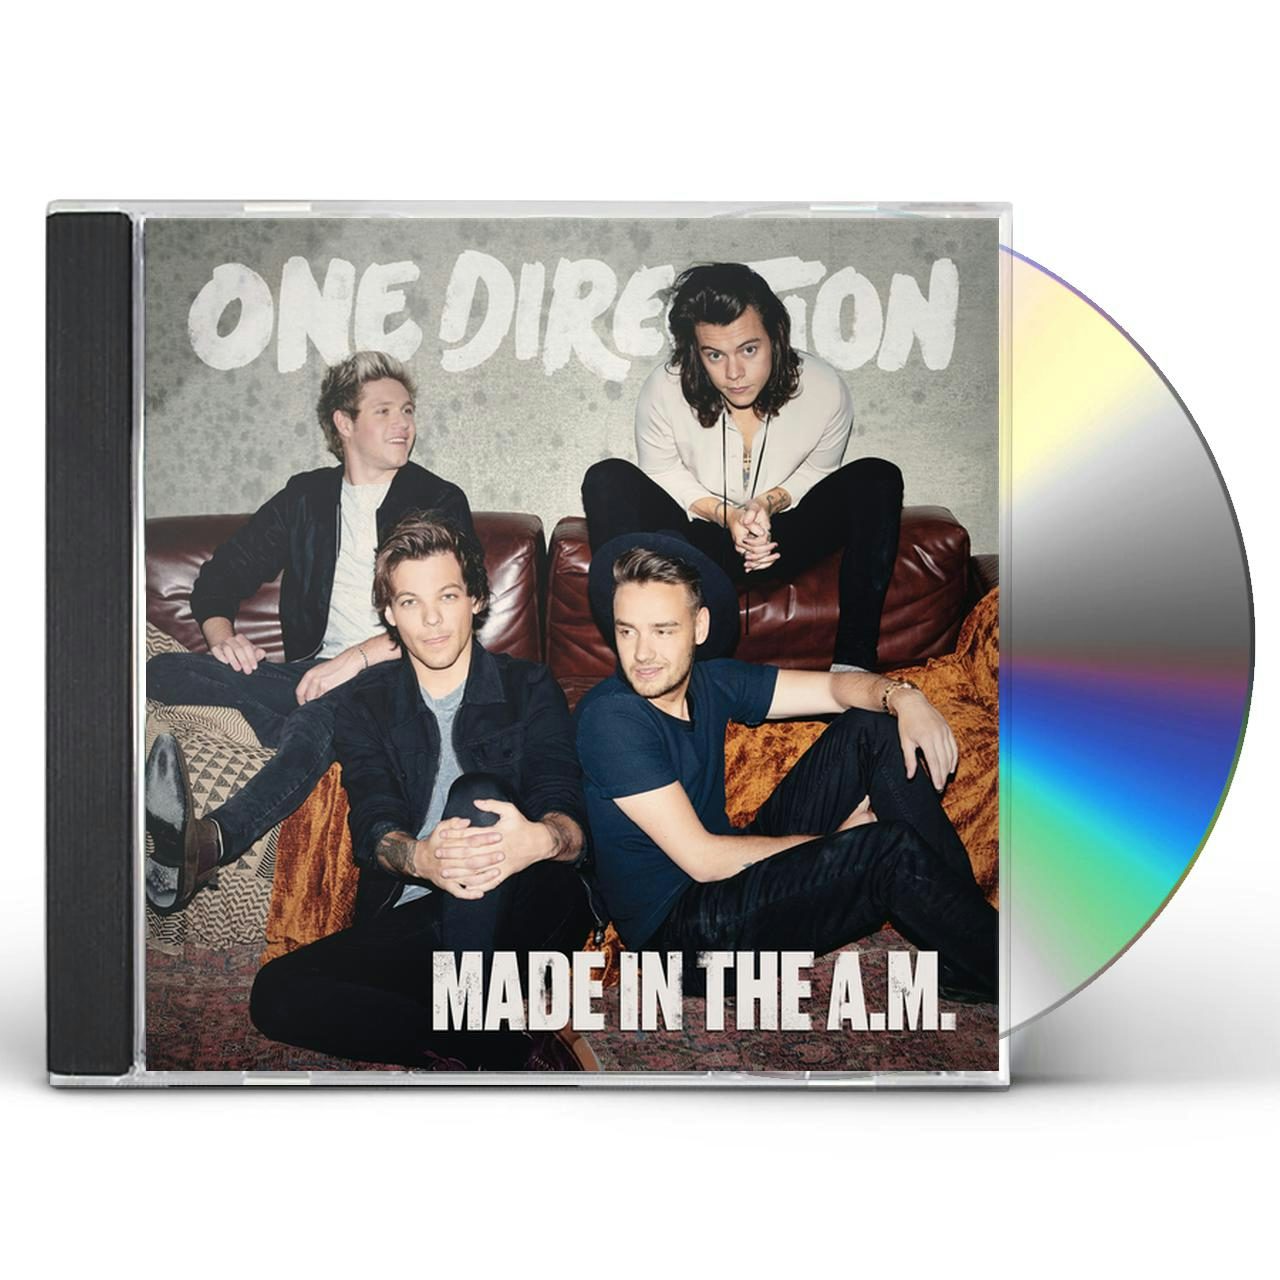 pictures of one direction made in the am album covers